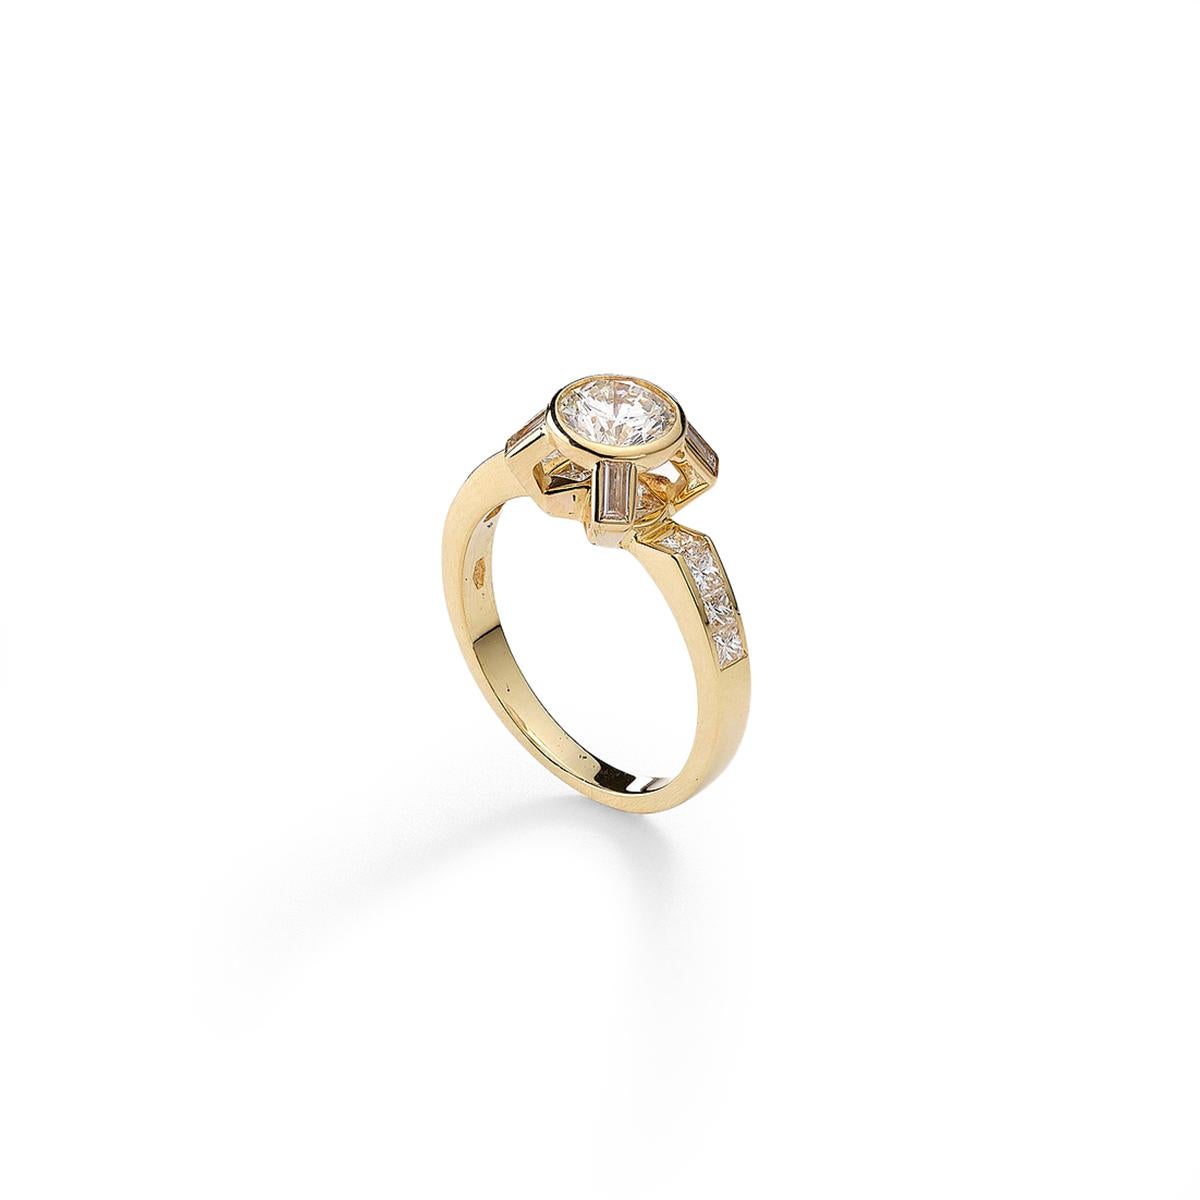 Ring in 18kt yellow gold set with one diamond 0.83 cts, 4 baguette cut diamonds 0.22 cts and 10 square diamonds 0.51 cts Size 53              